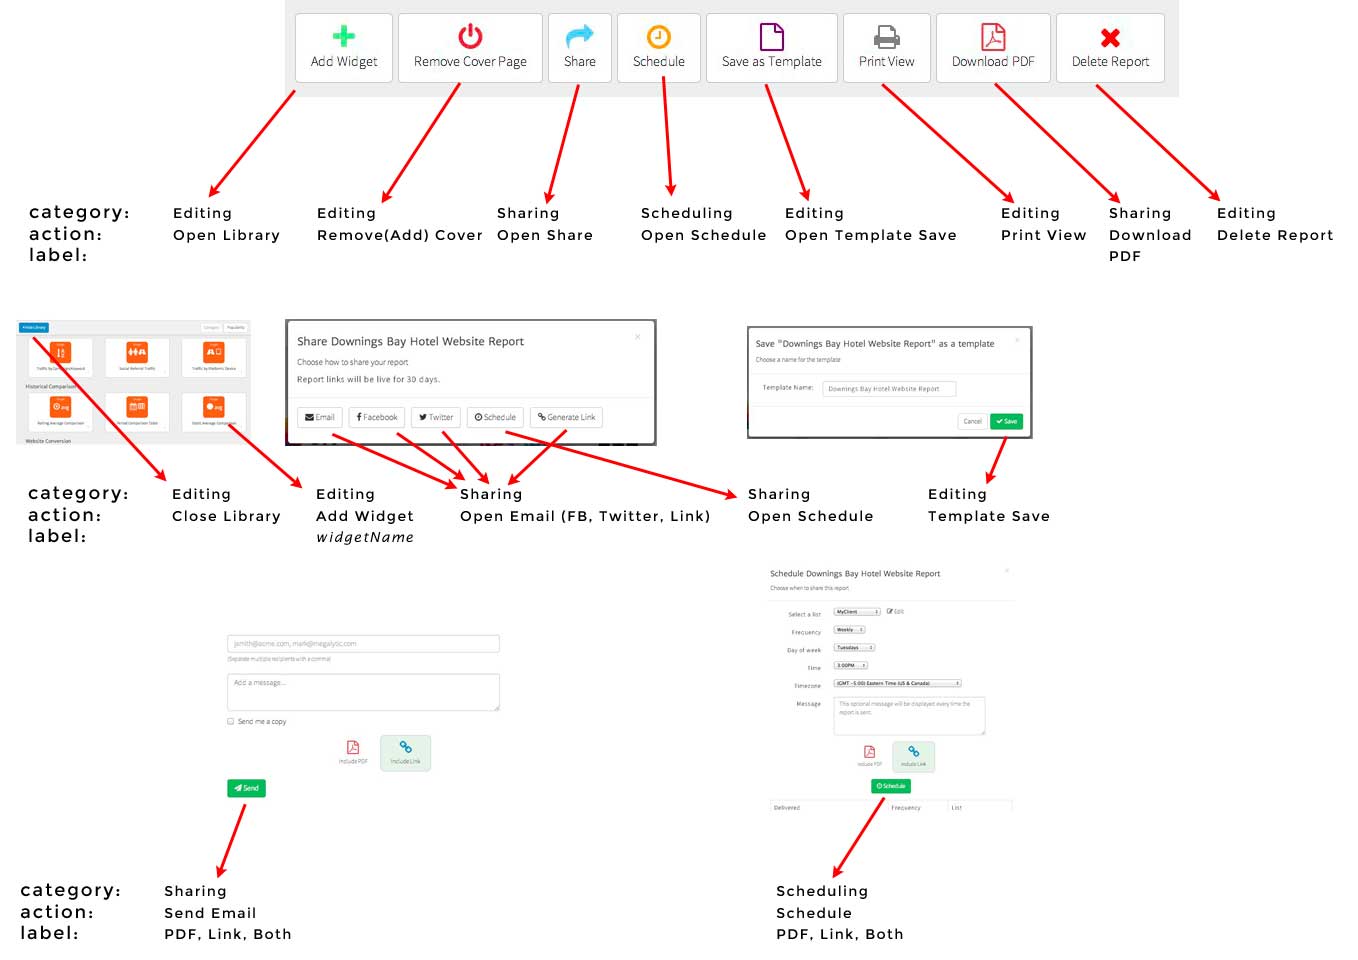 diagram mapping the Megalytic user interface to Google Analytics events